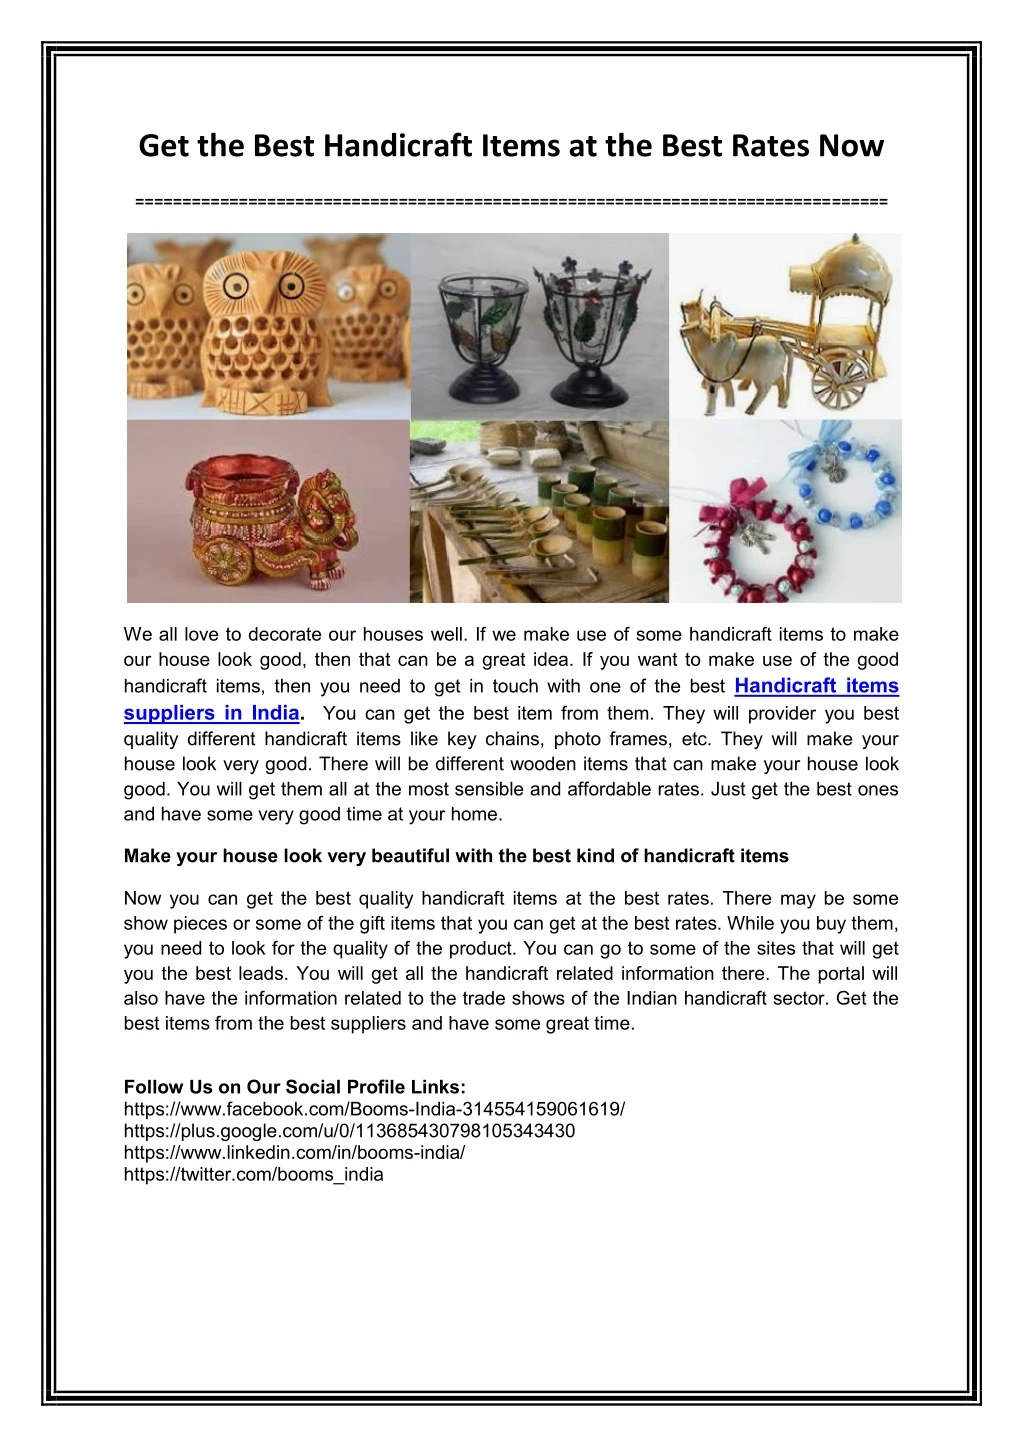 get the best handicraft items at the best rates